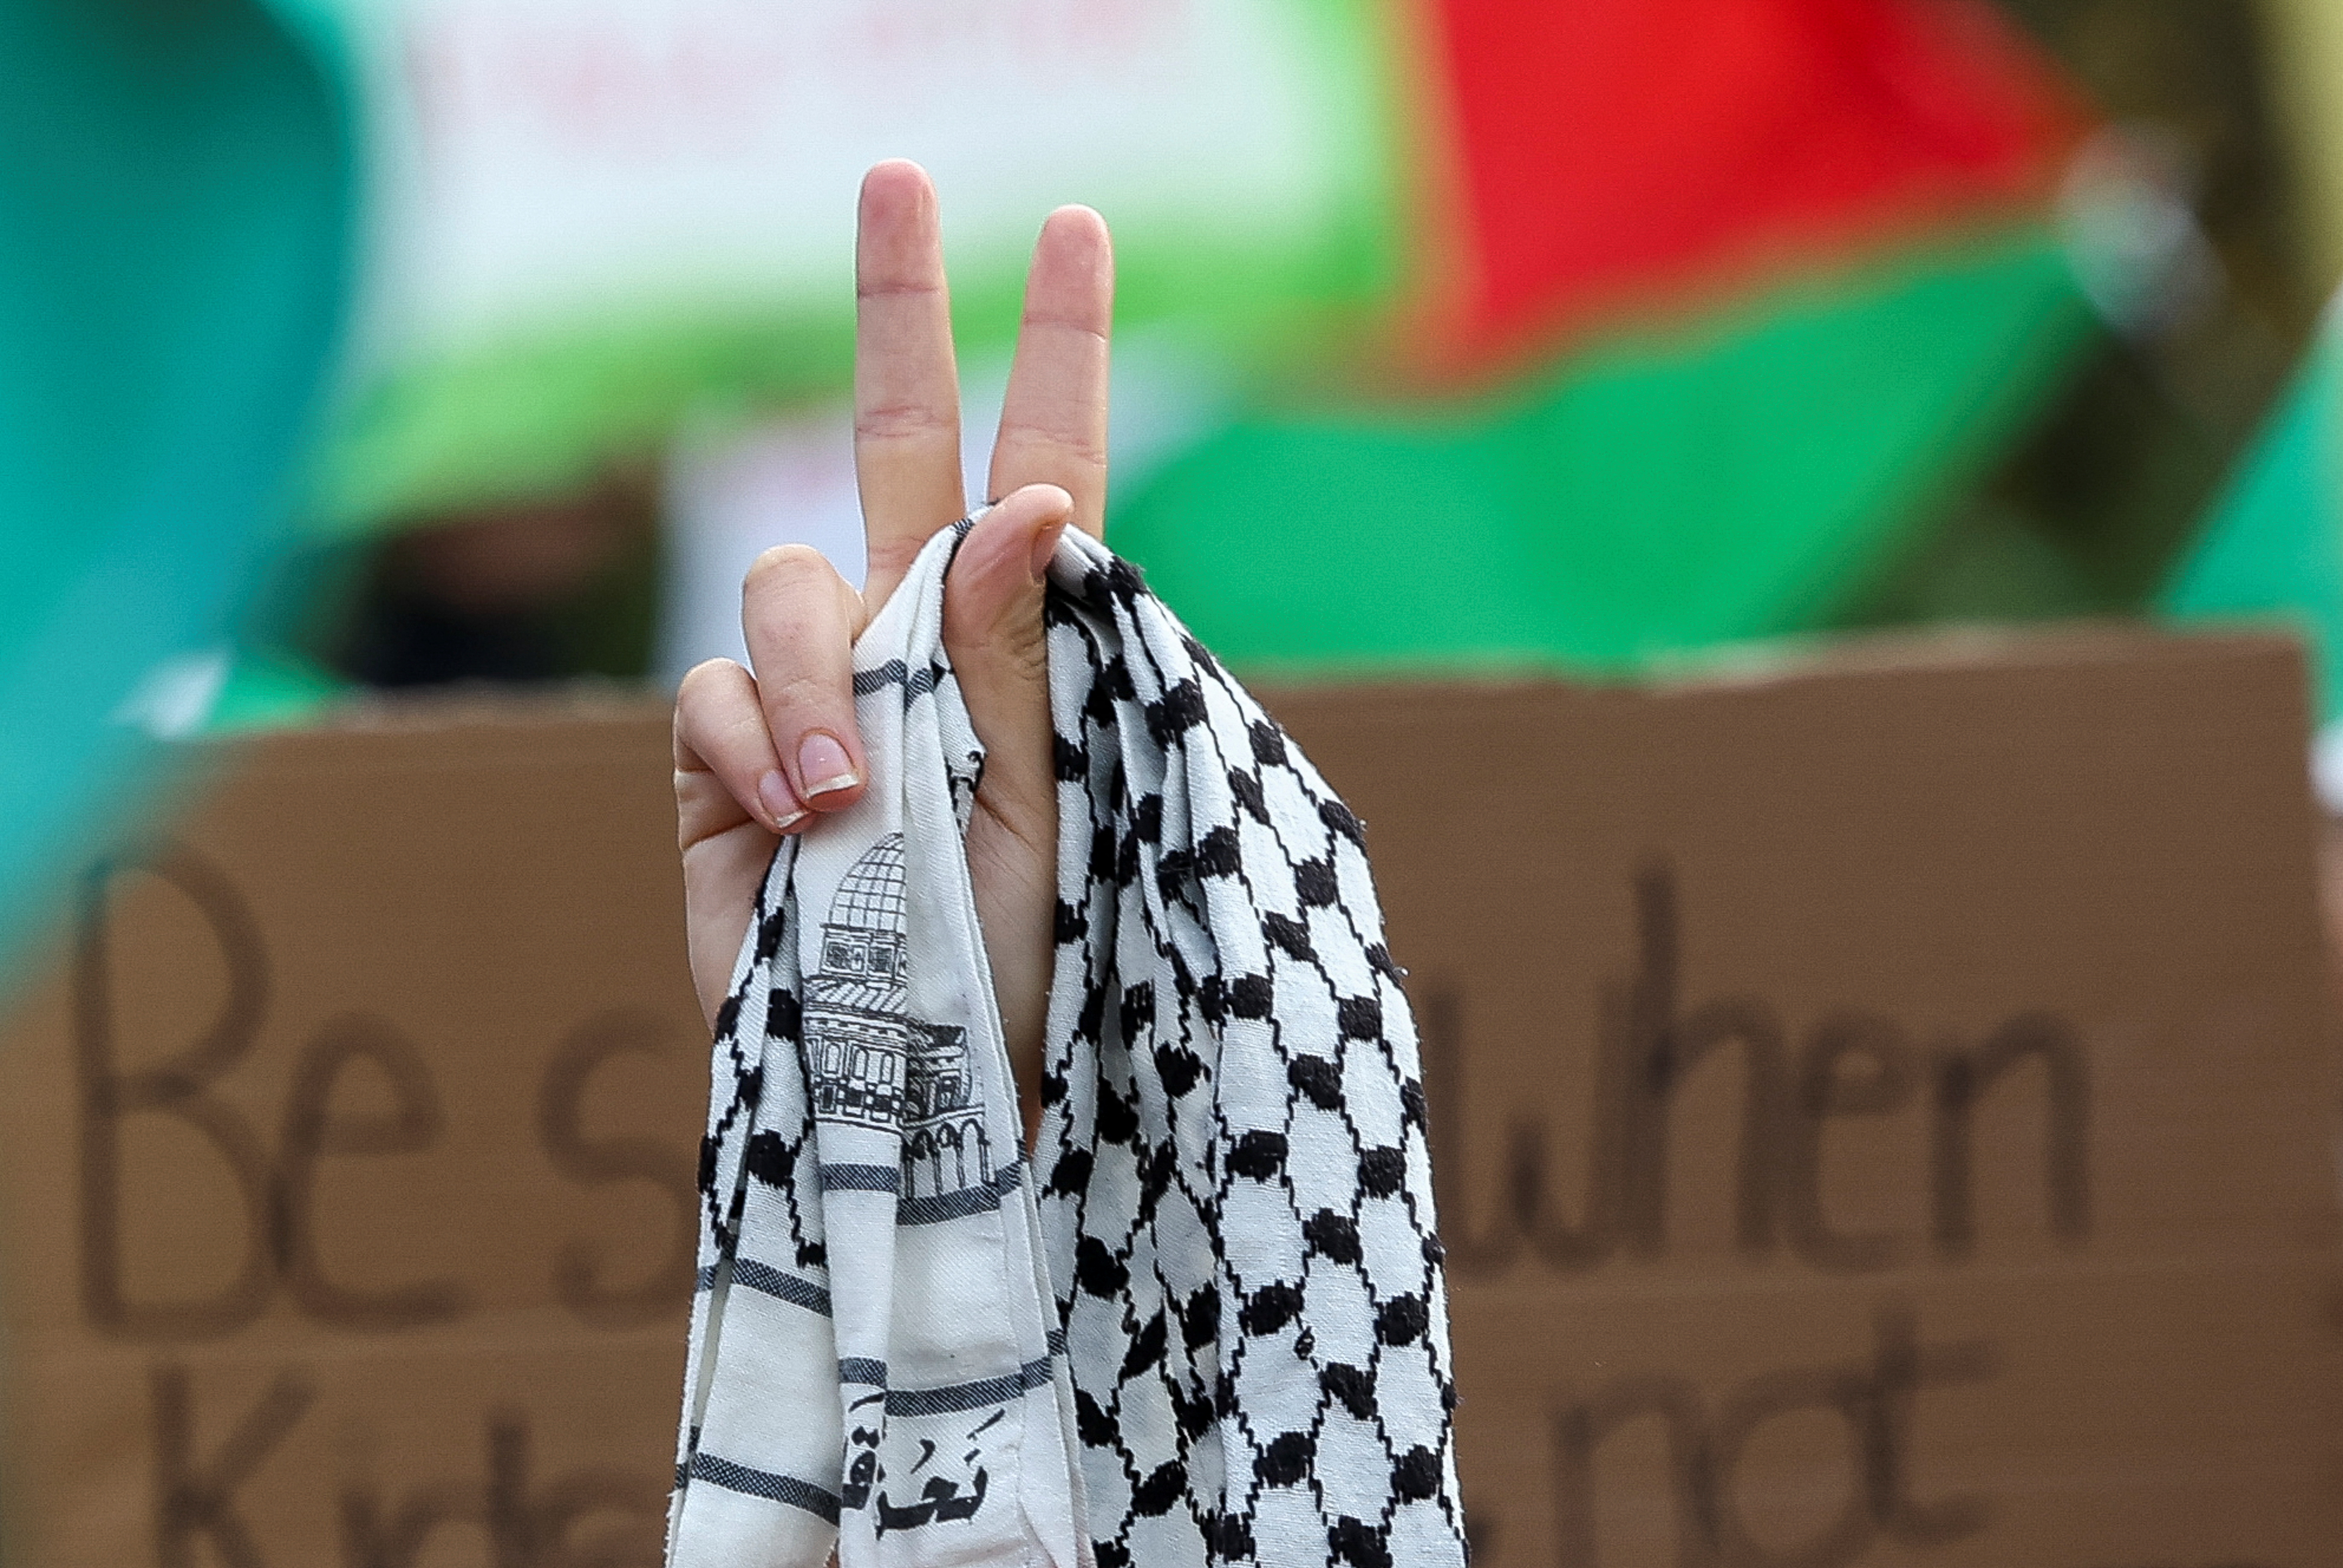 Protest in support of Palestinians in Gaza in front of EU headquarters in Brussels